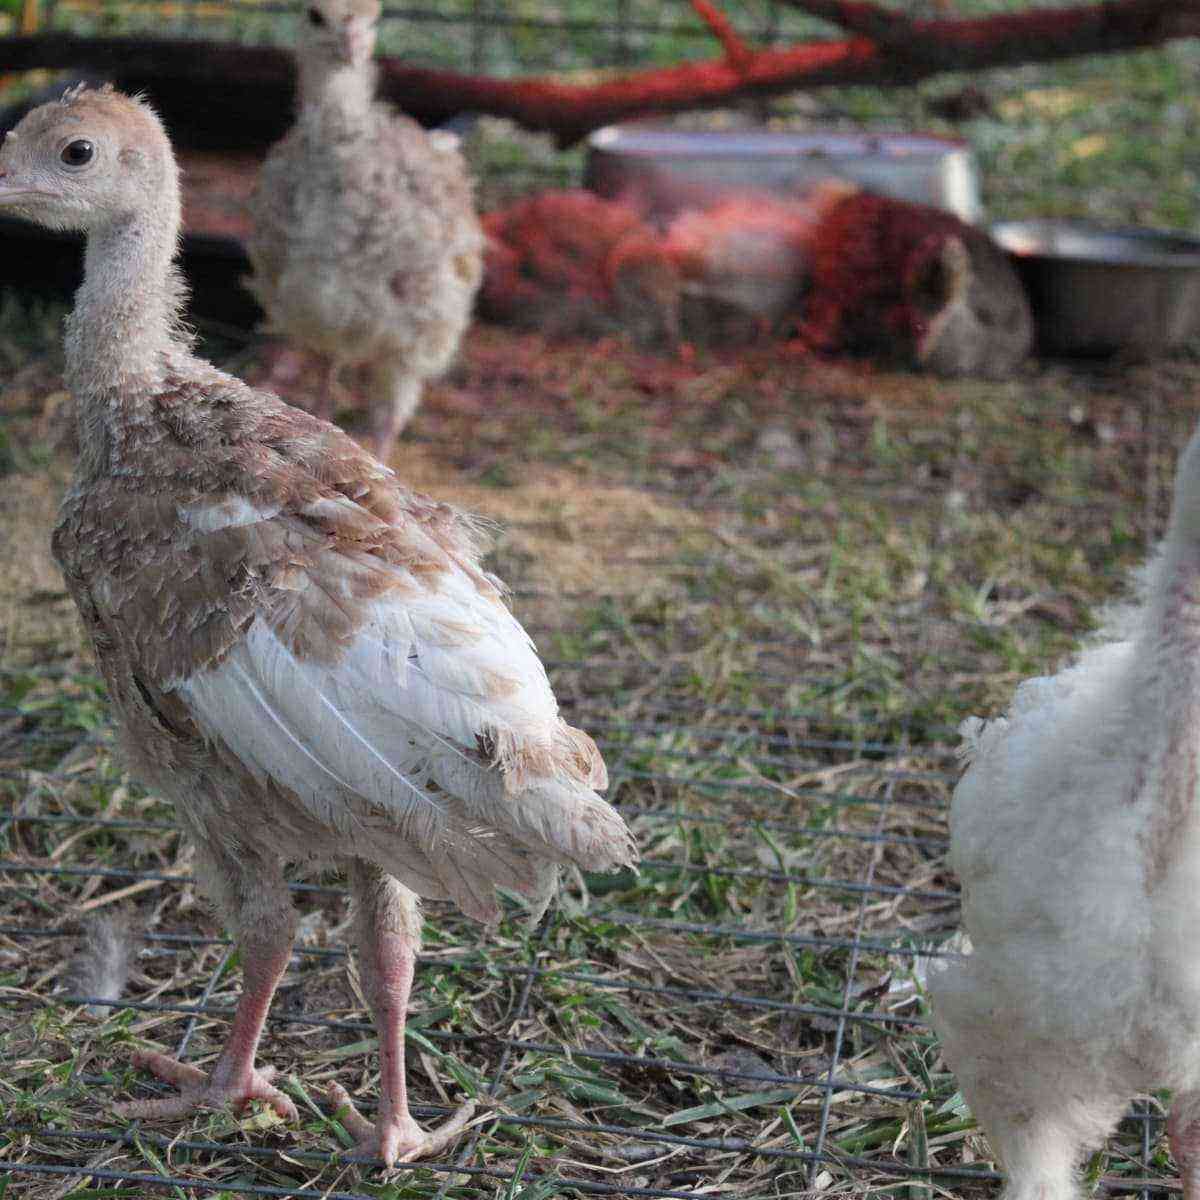 Turkey poults: feeding and caring for them